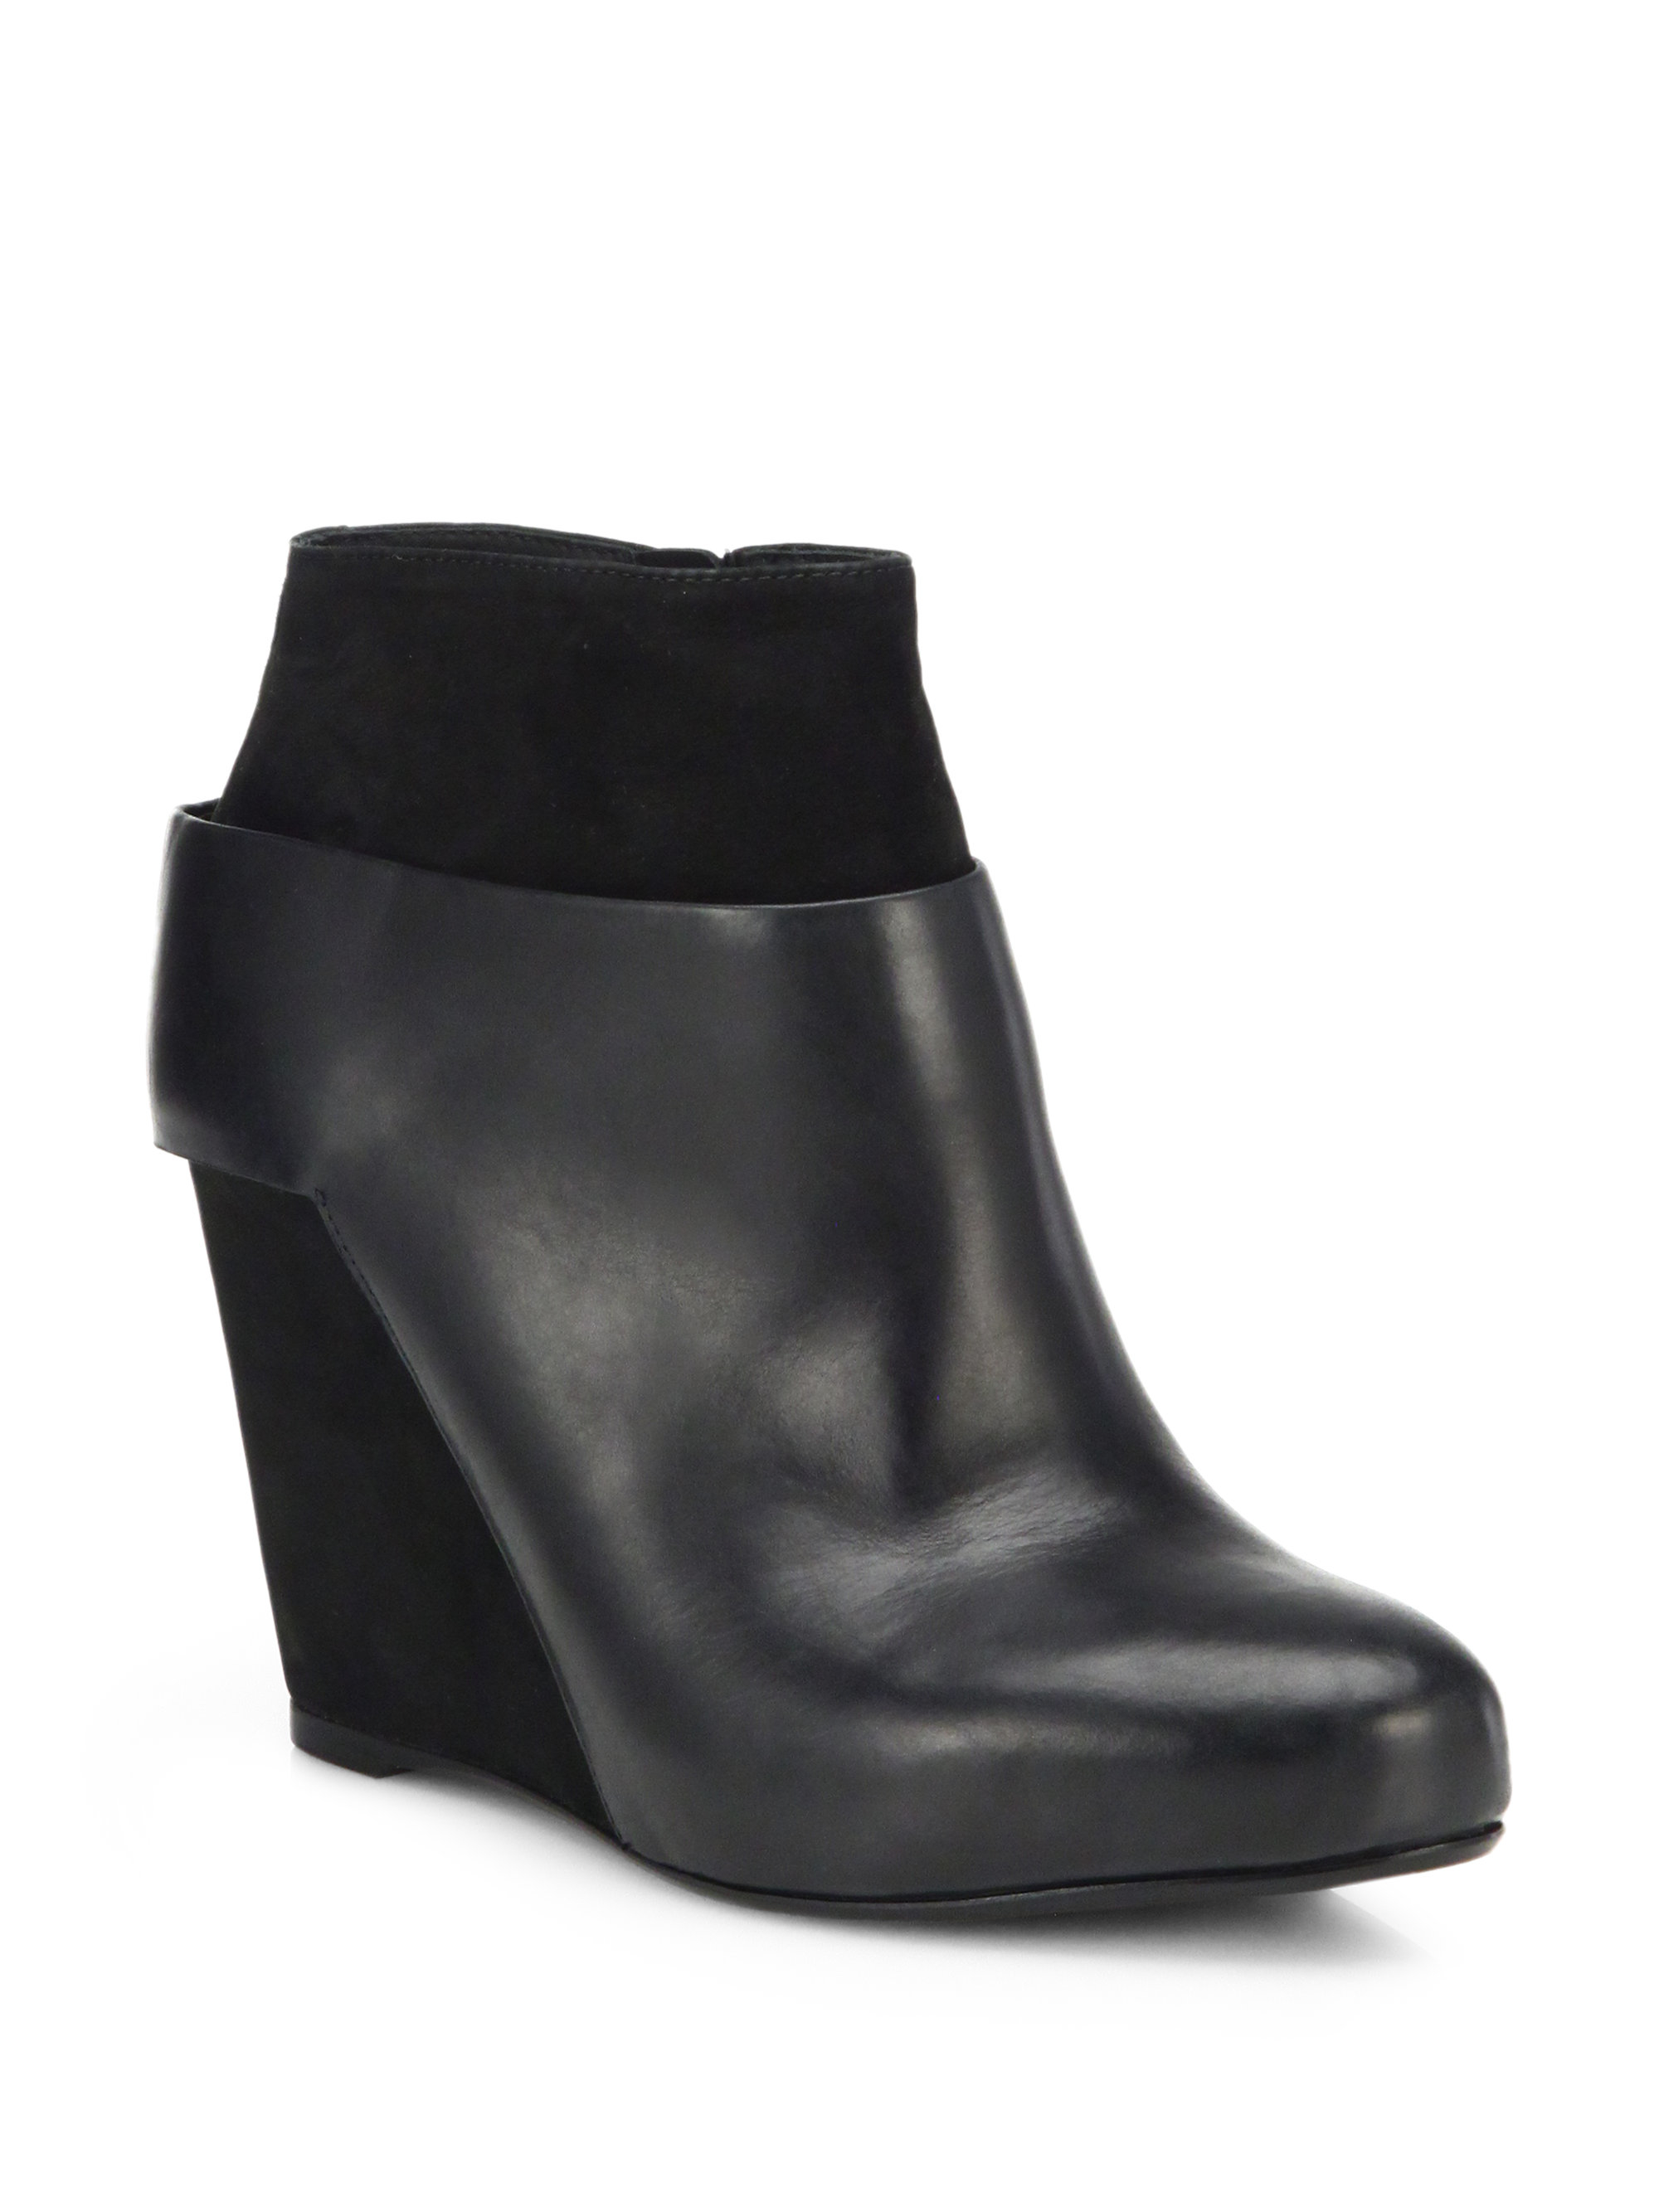 comfortable black wedge booties with arch support